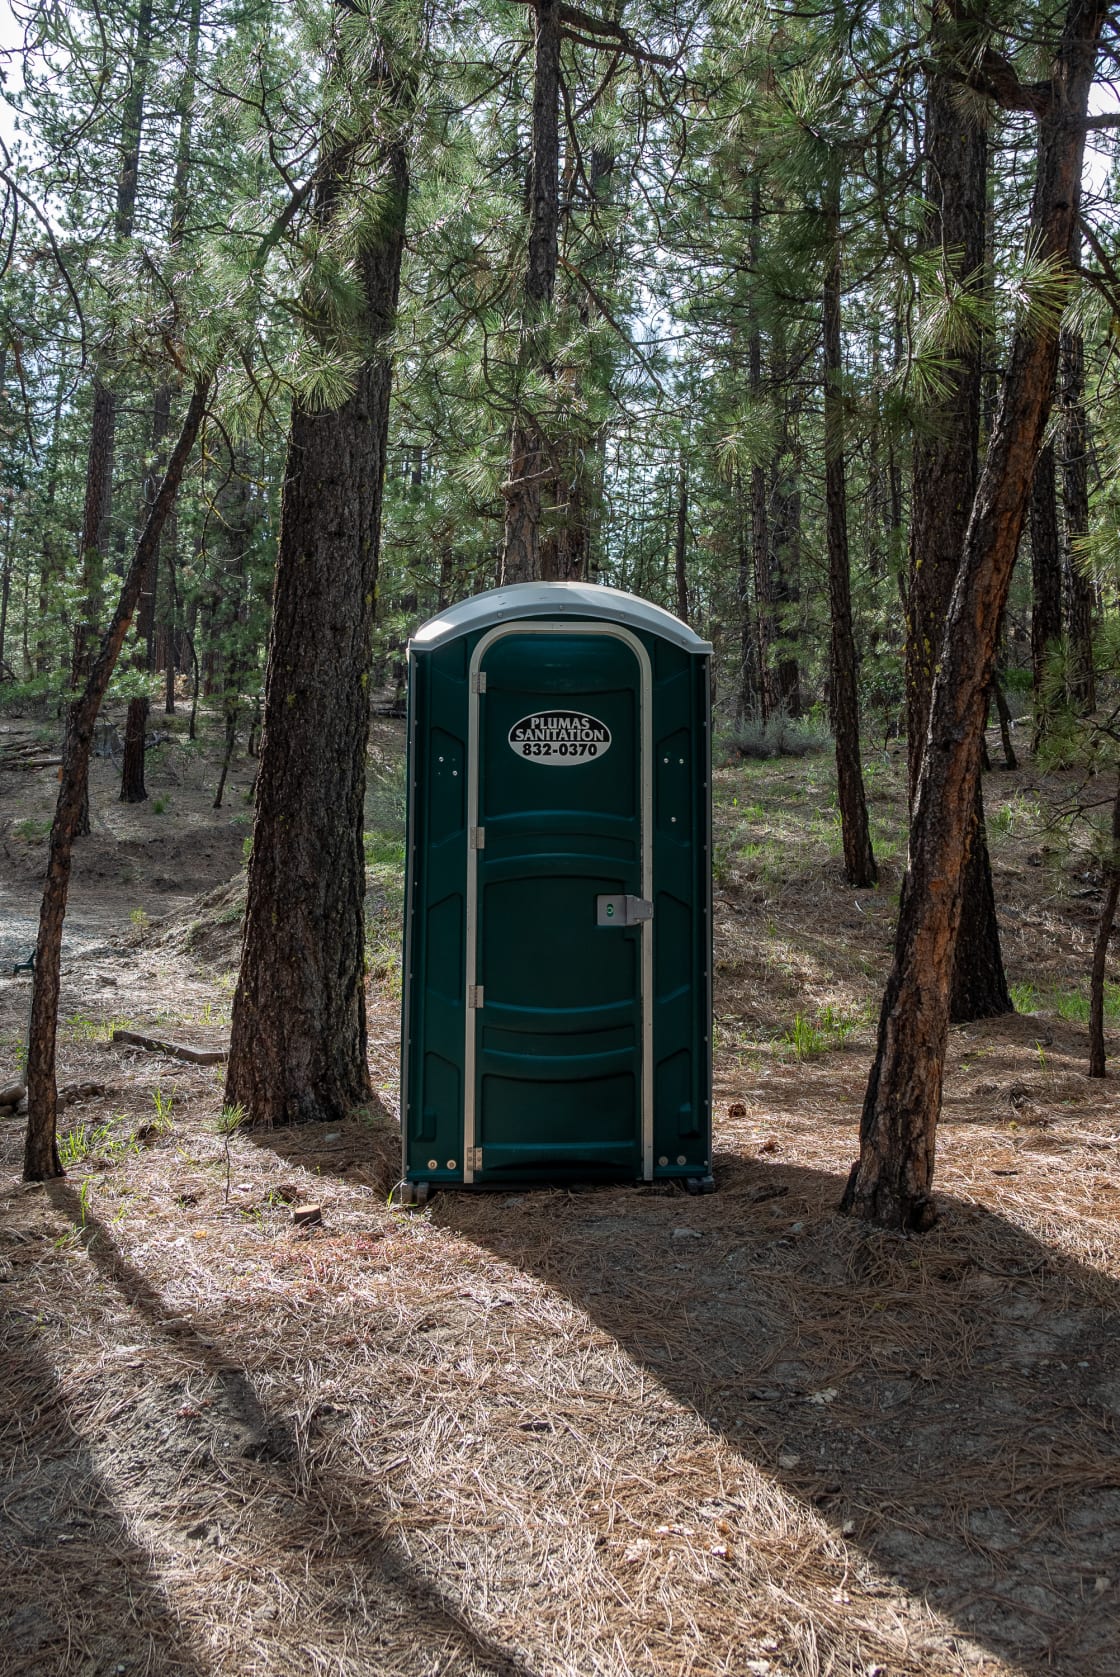 Restrooms on site. 